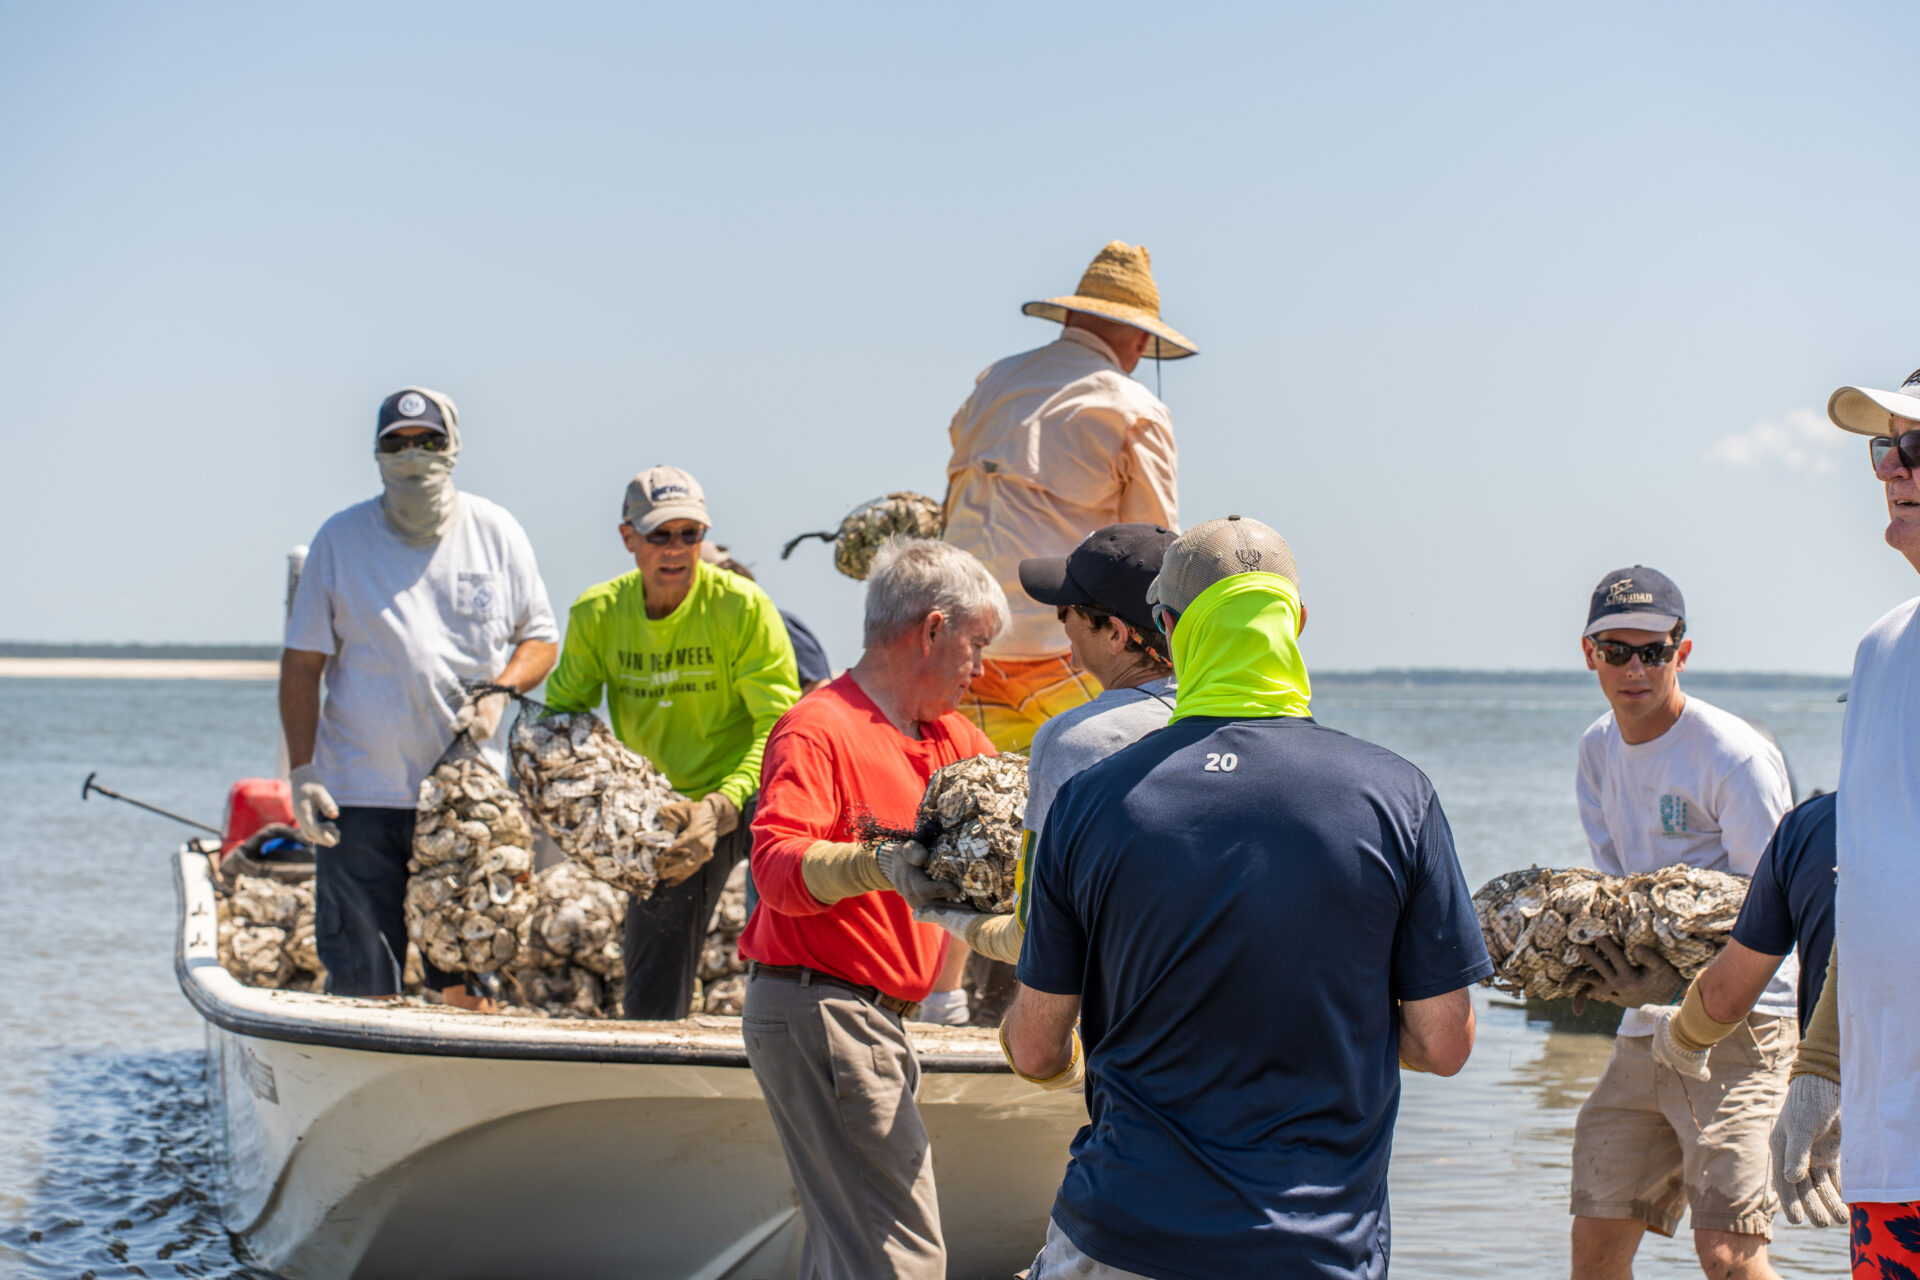 Community member placing bags of oysters at the oyster reef rebuilding site in Daufuskie Island.